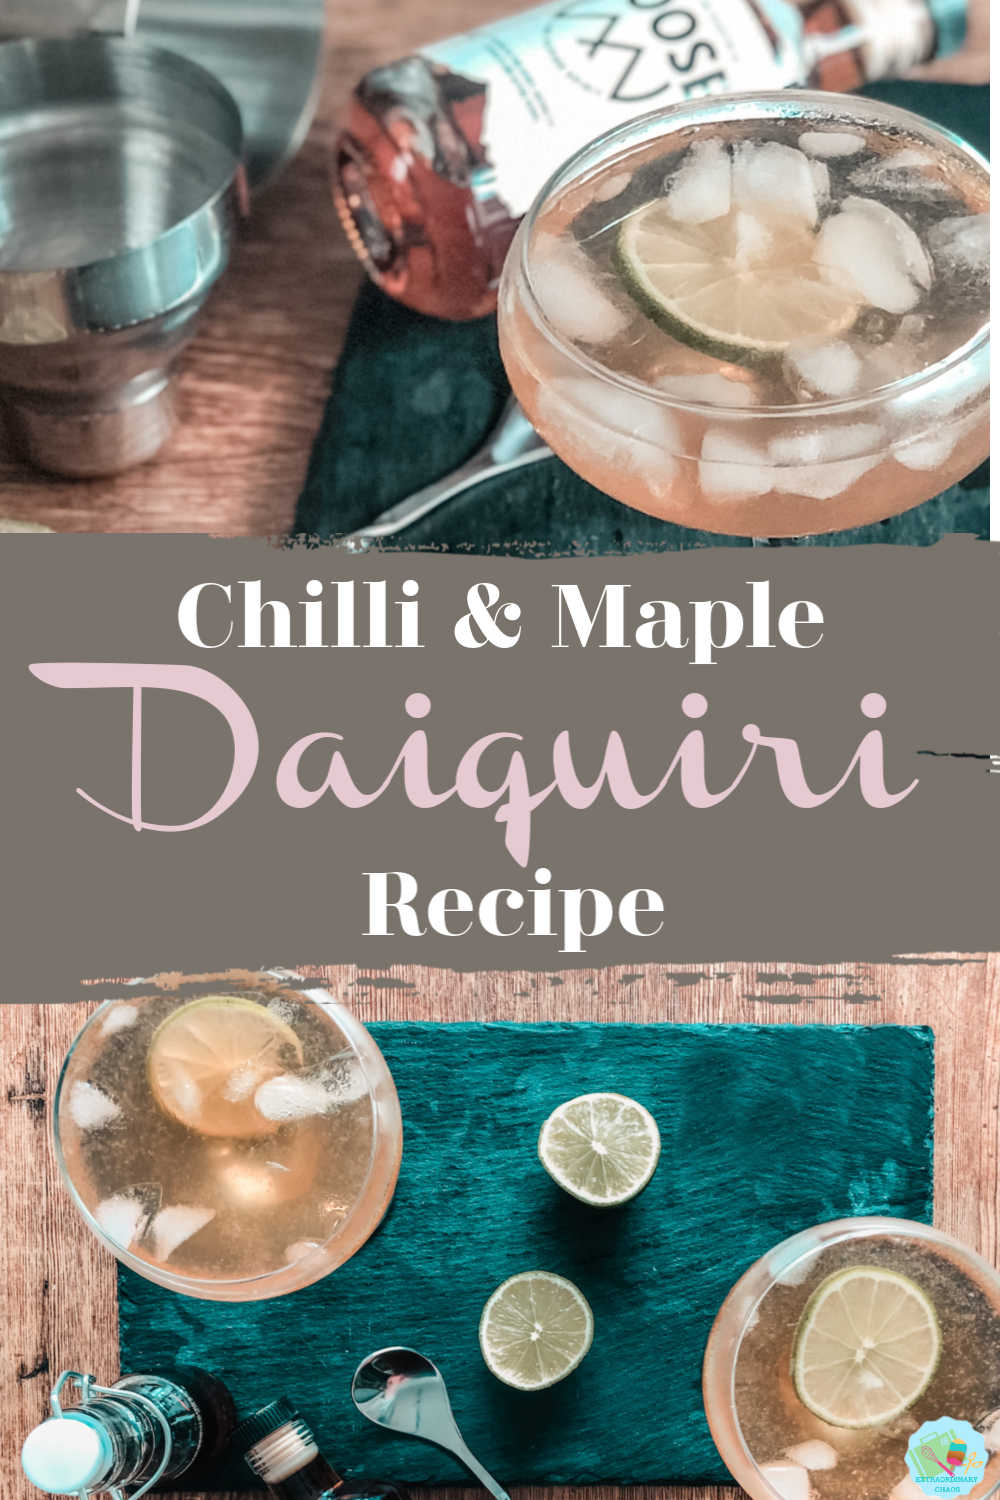 How to make a chilli and maple daiquiri cocktail